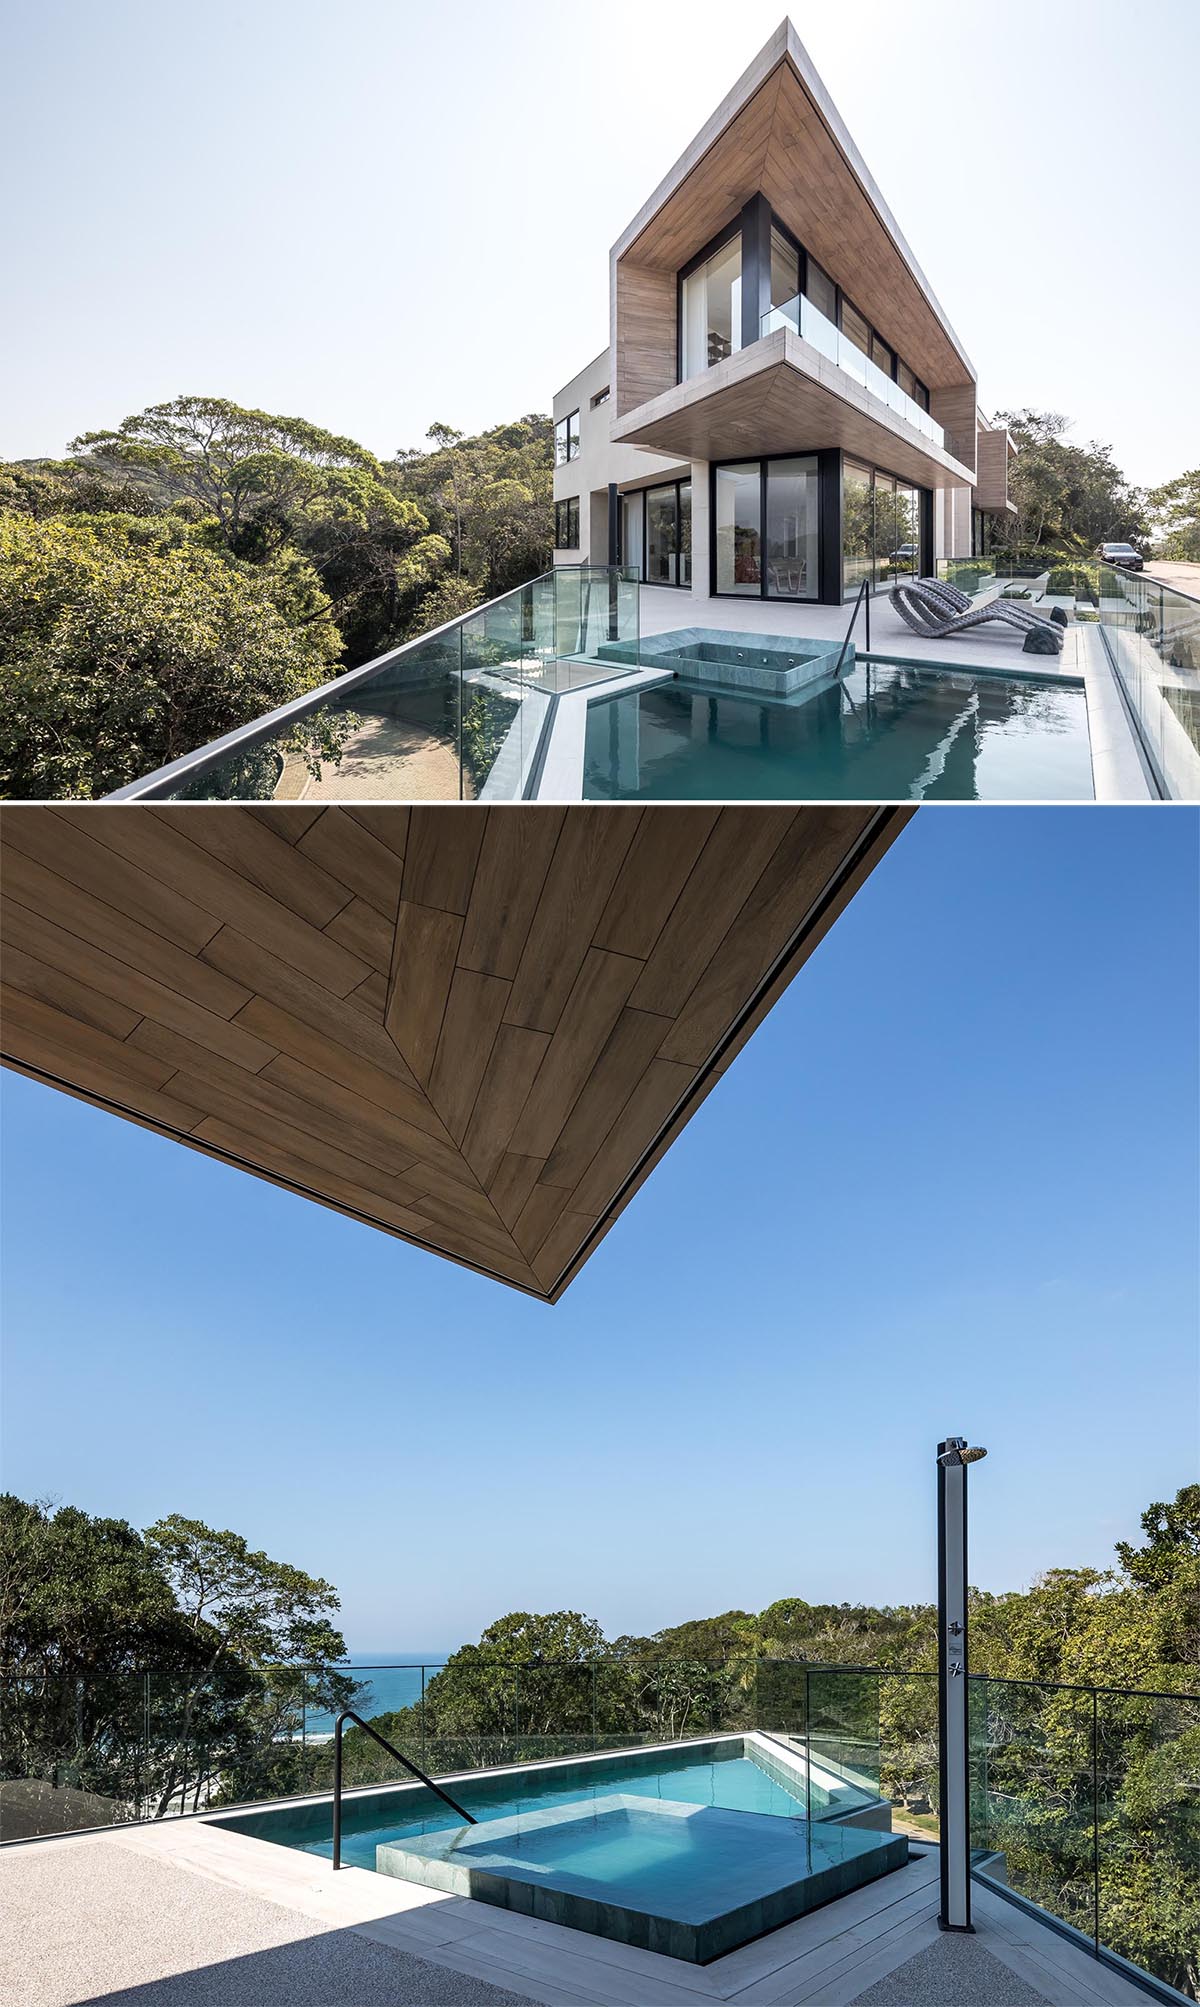 This modern house has a swimming pool, and it's easy to see when looking up at it from below, how cantilevered it is.